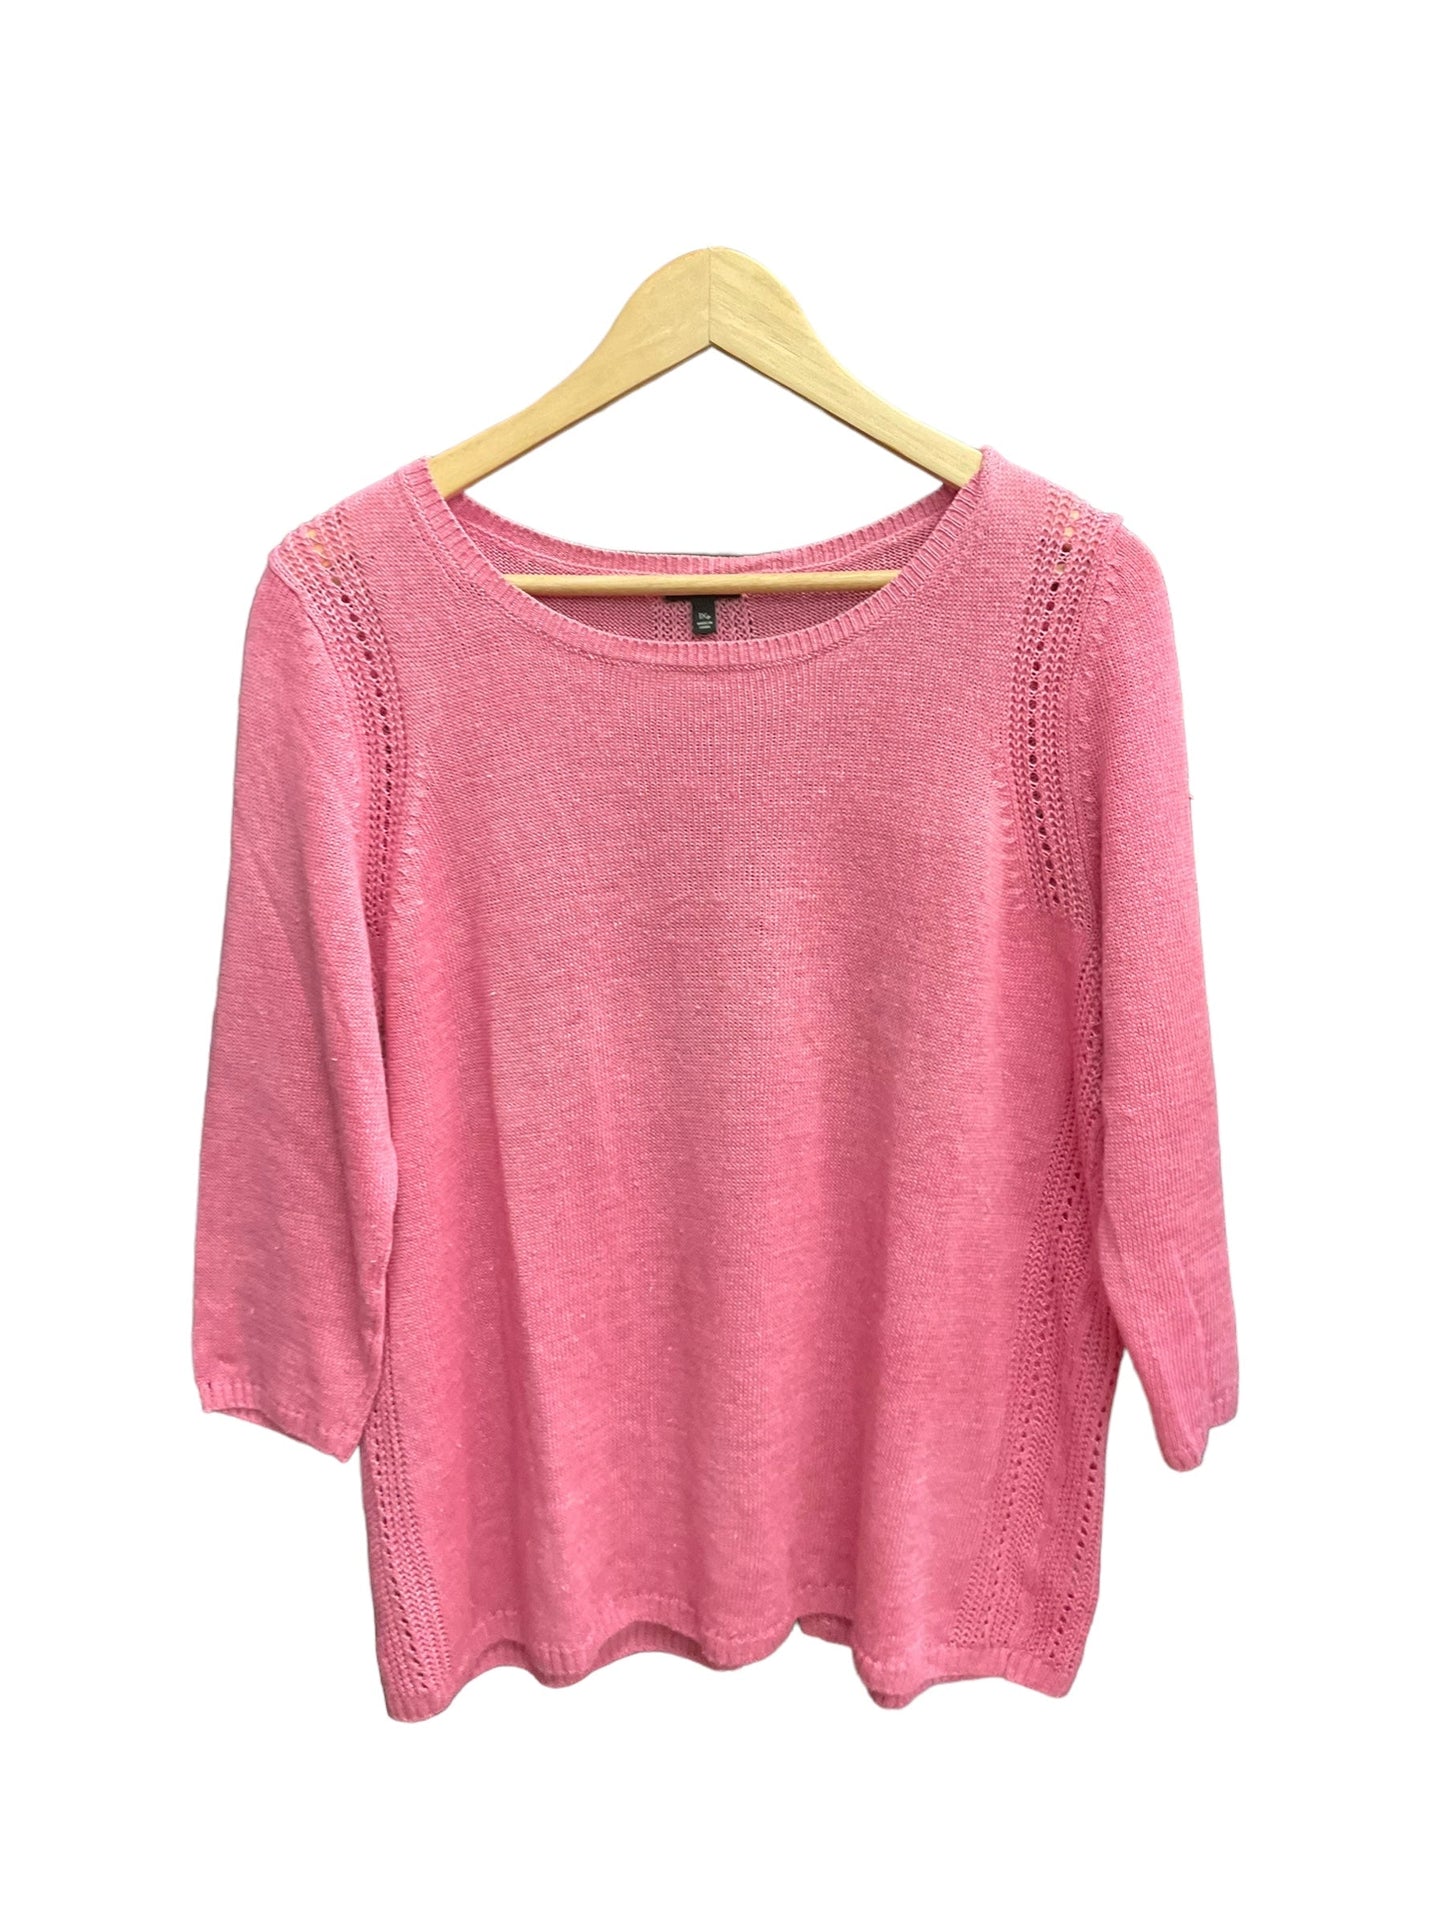 Pink Top 3/4 Sleeve Talbots, Size 1x